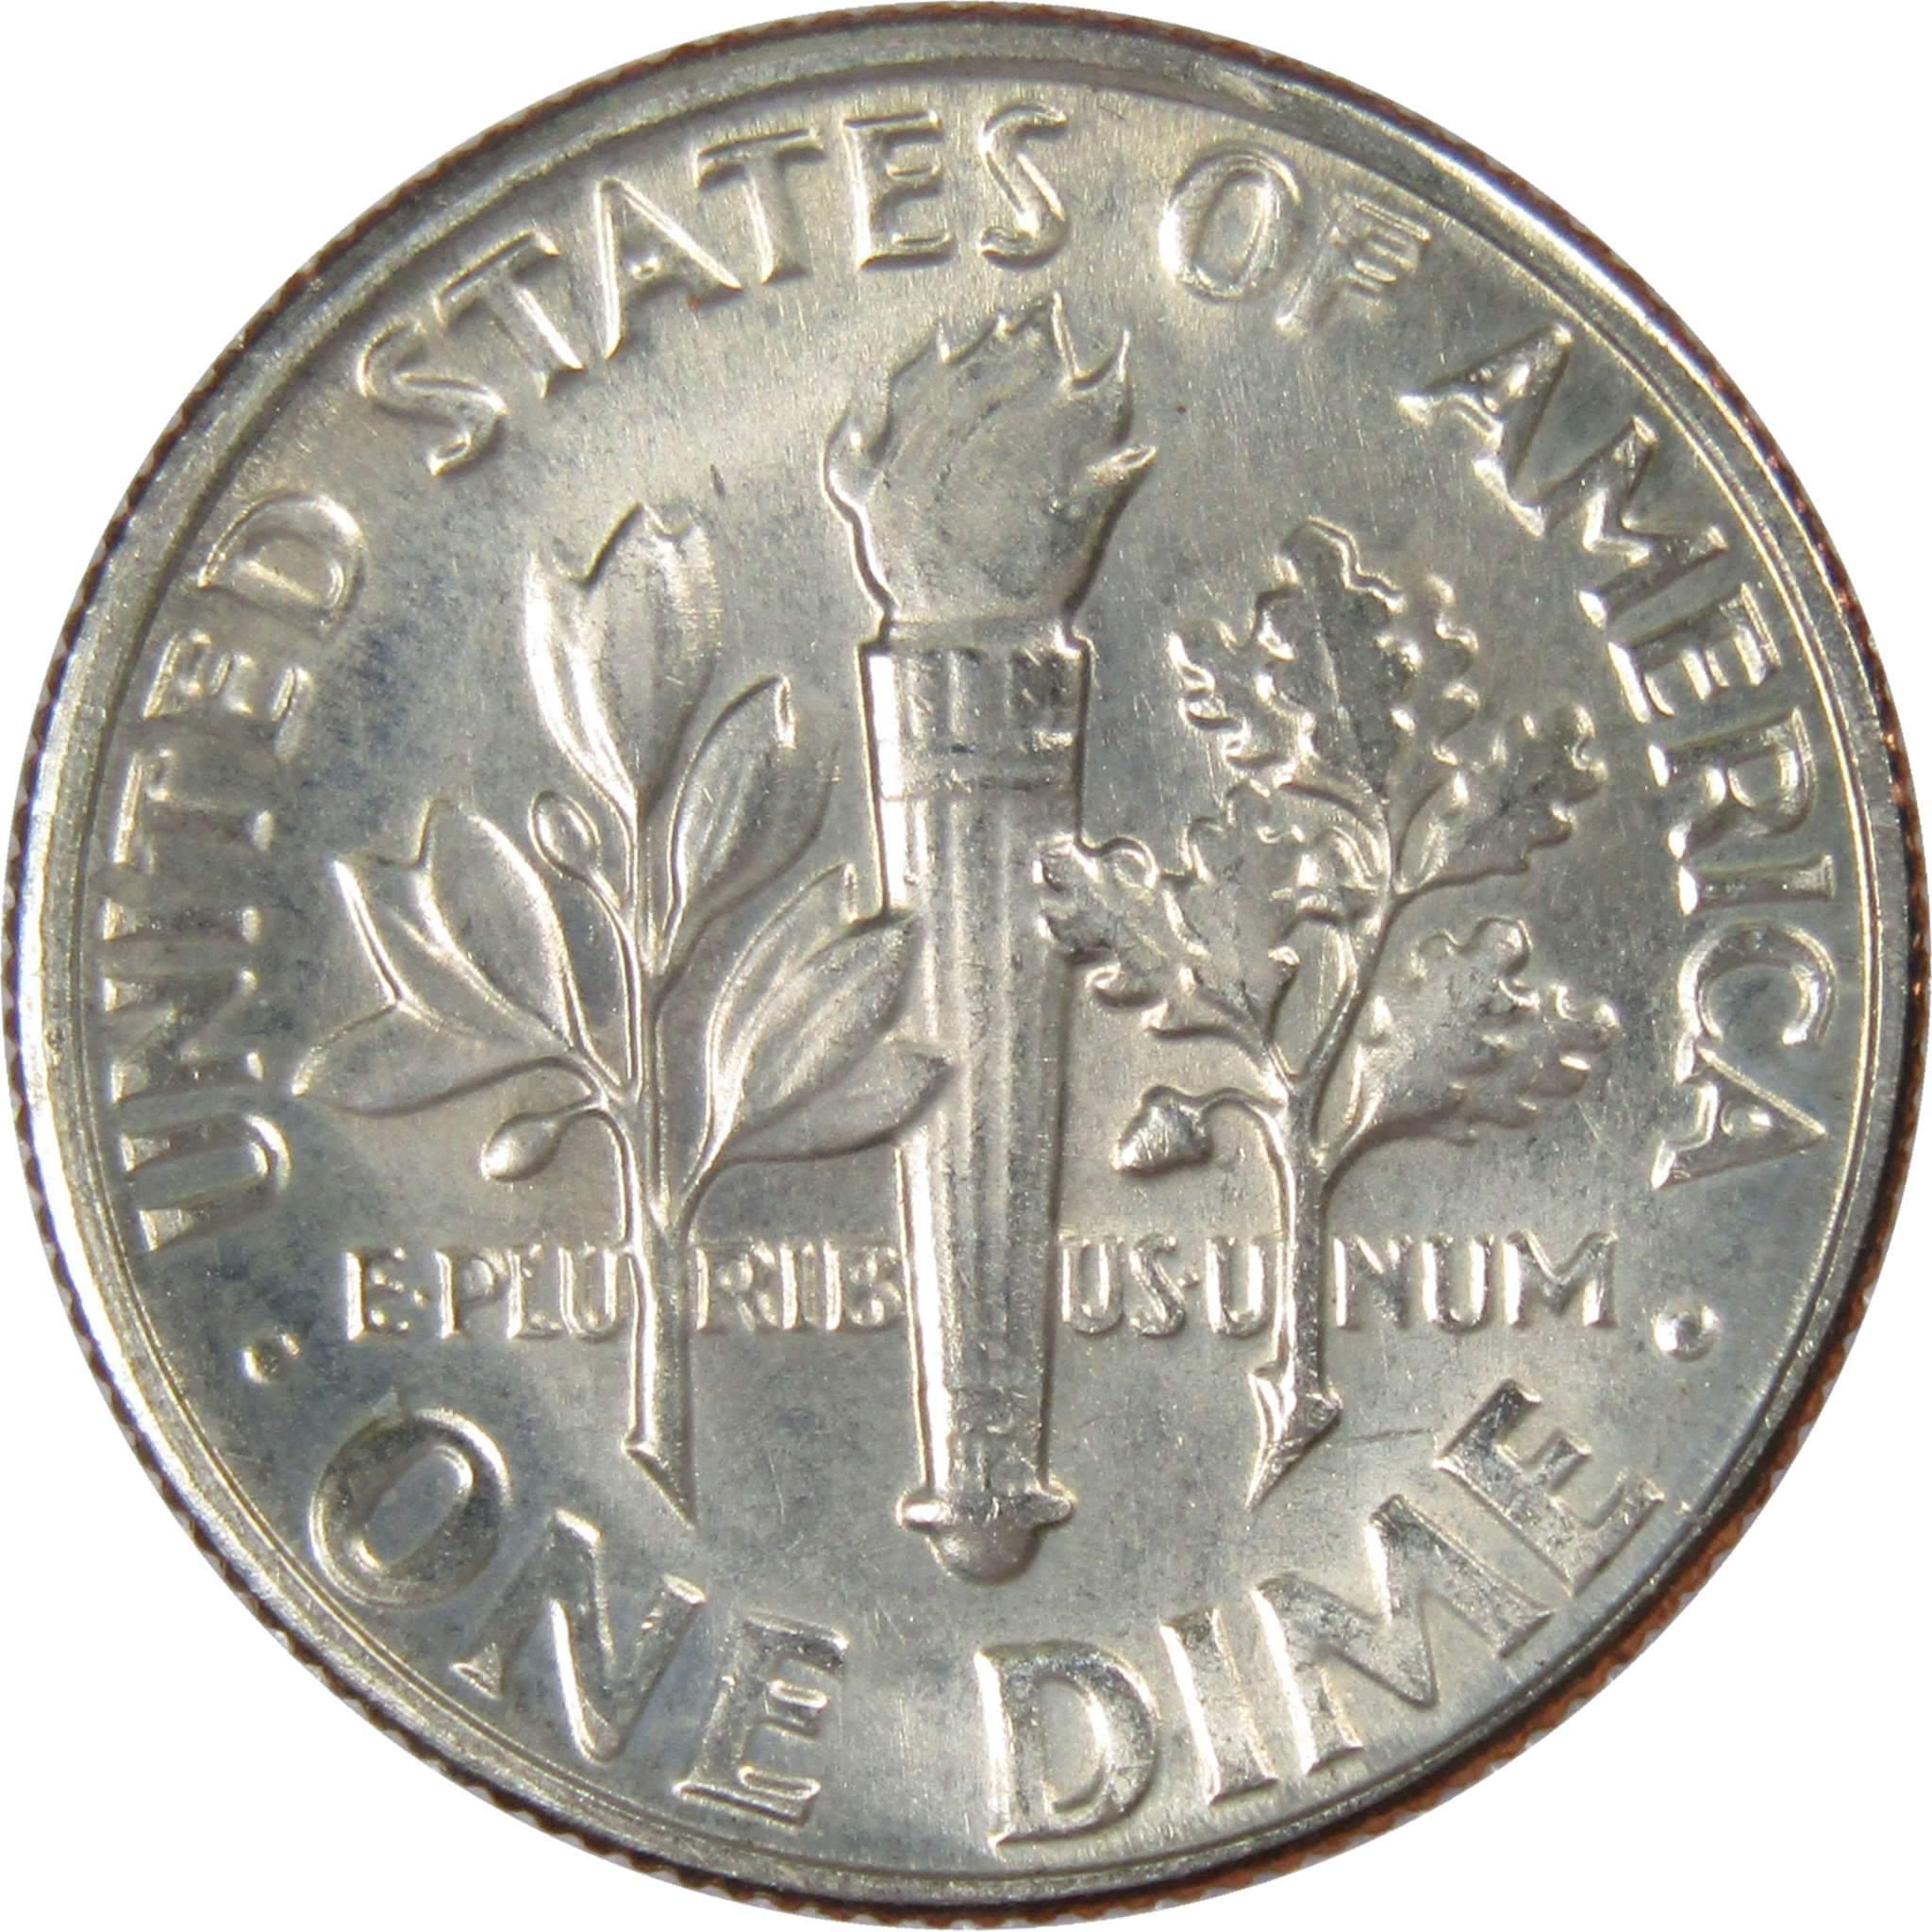 1980 D Roosevelt Dime BU Uncirculated Mint State 10c US Coin Collectible